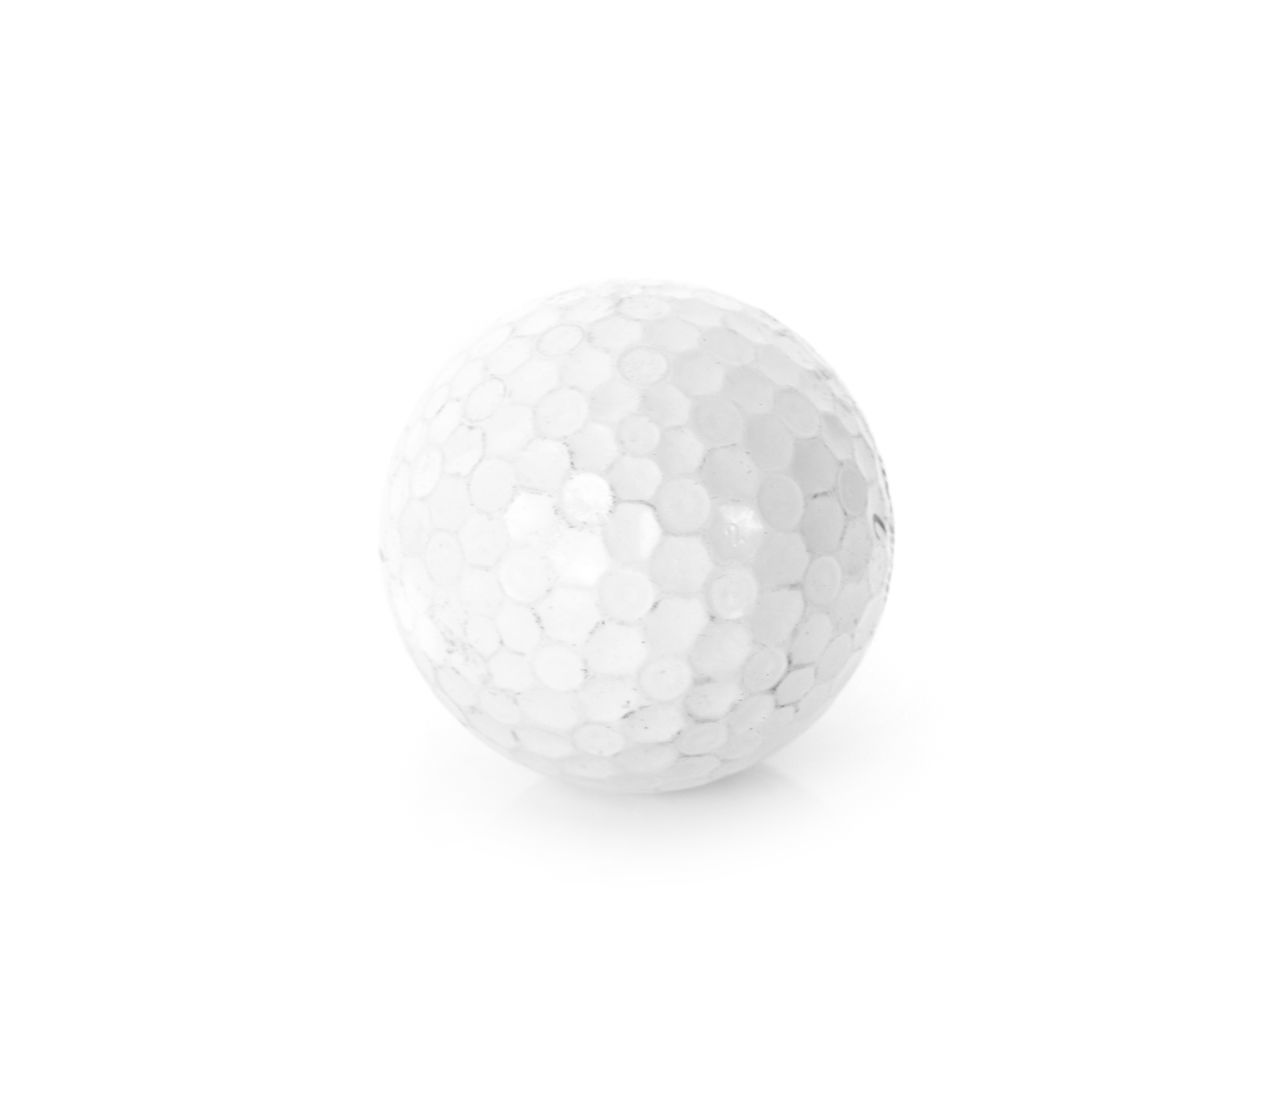 CLOSE-UP OF BALL AND WHITE BACKGROUND